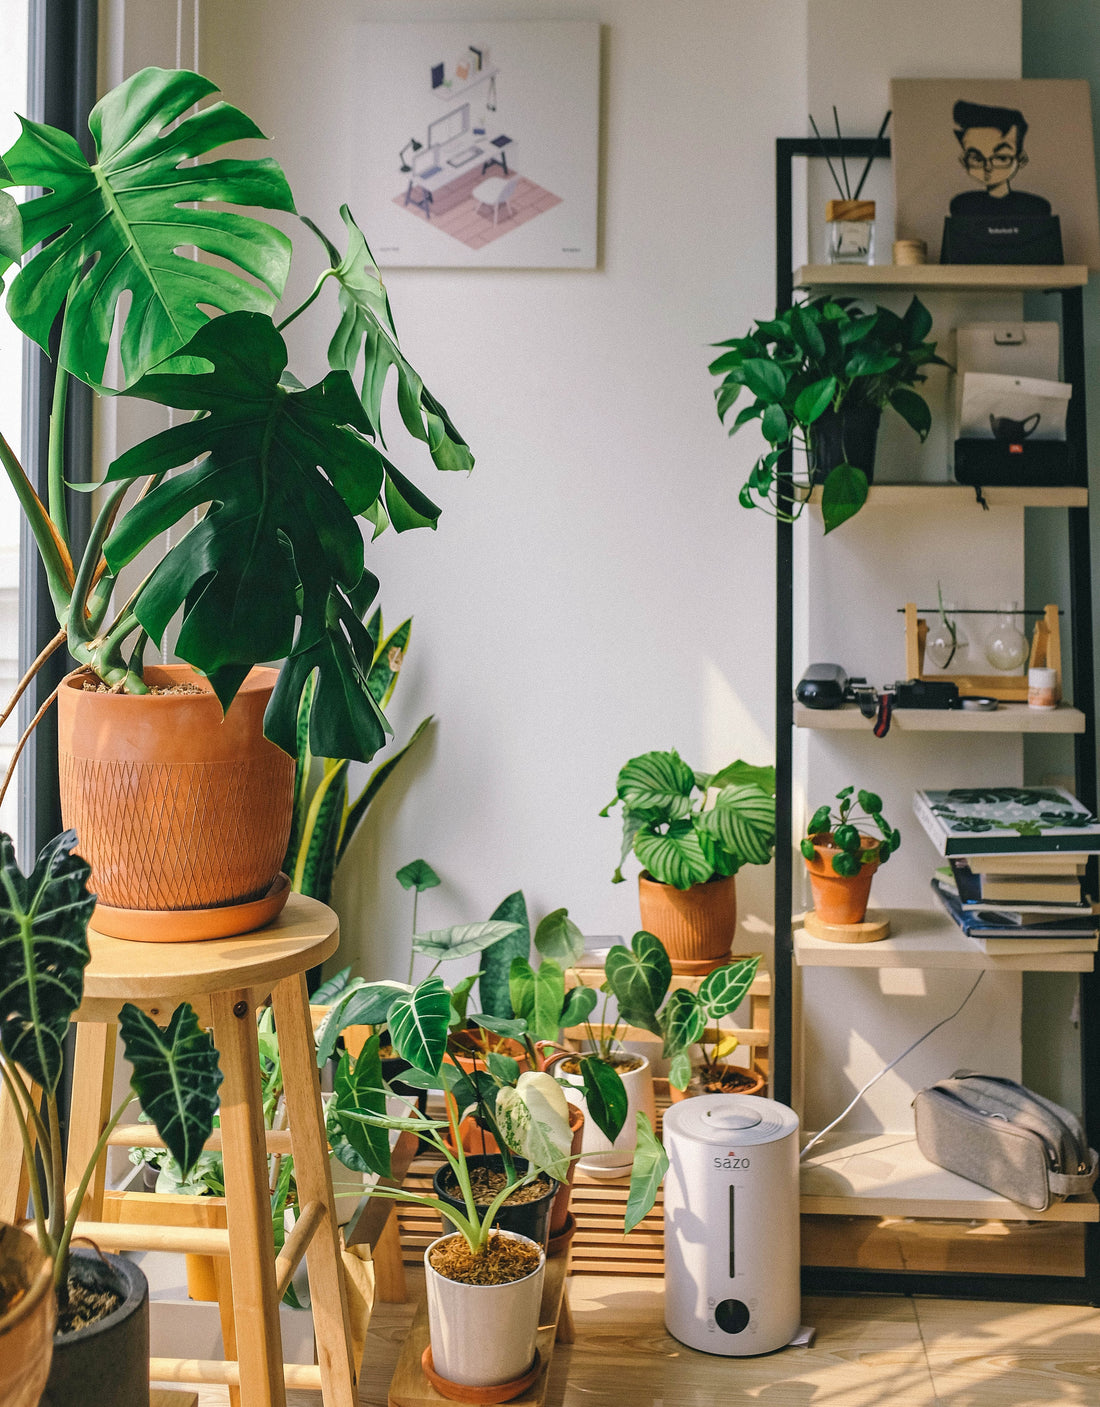 A collection of houseplants next to a window